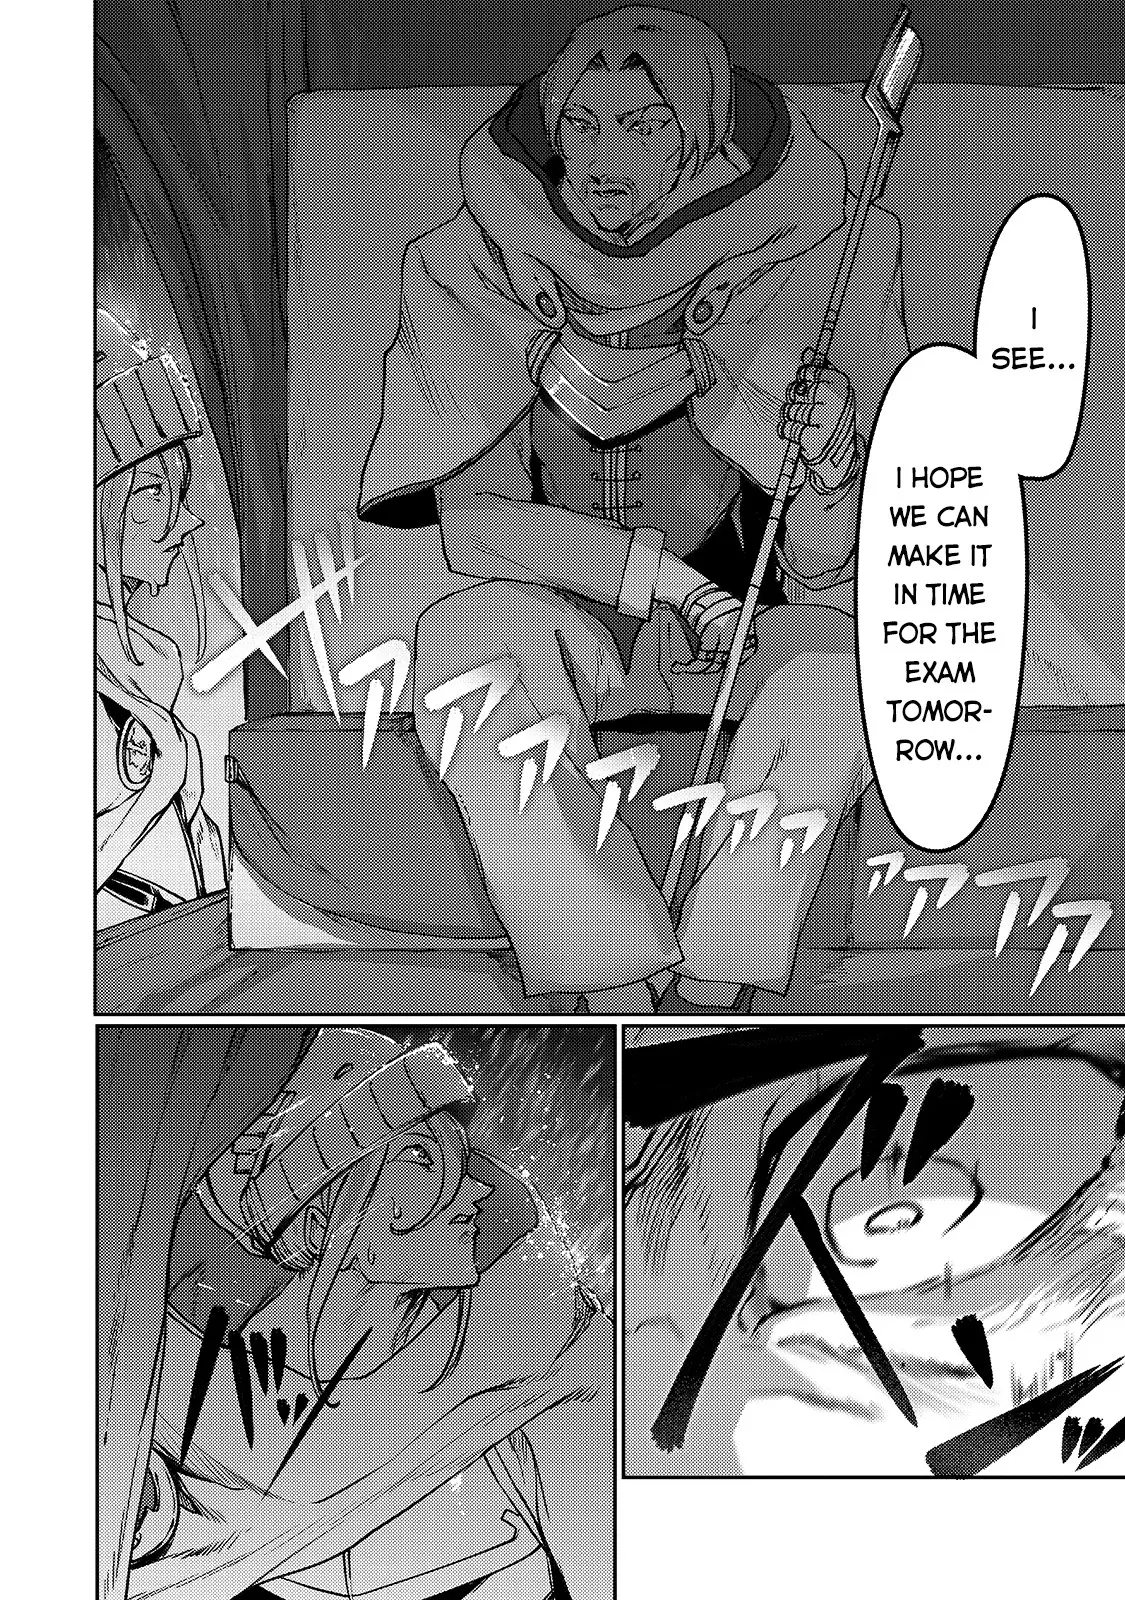 The Useless Tamer Will Turn Into The Top Unconsciously By My Previous Life Knowledge - 7 page 11